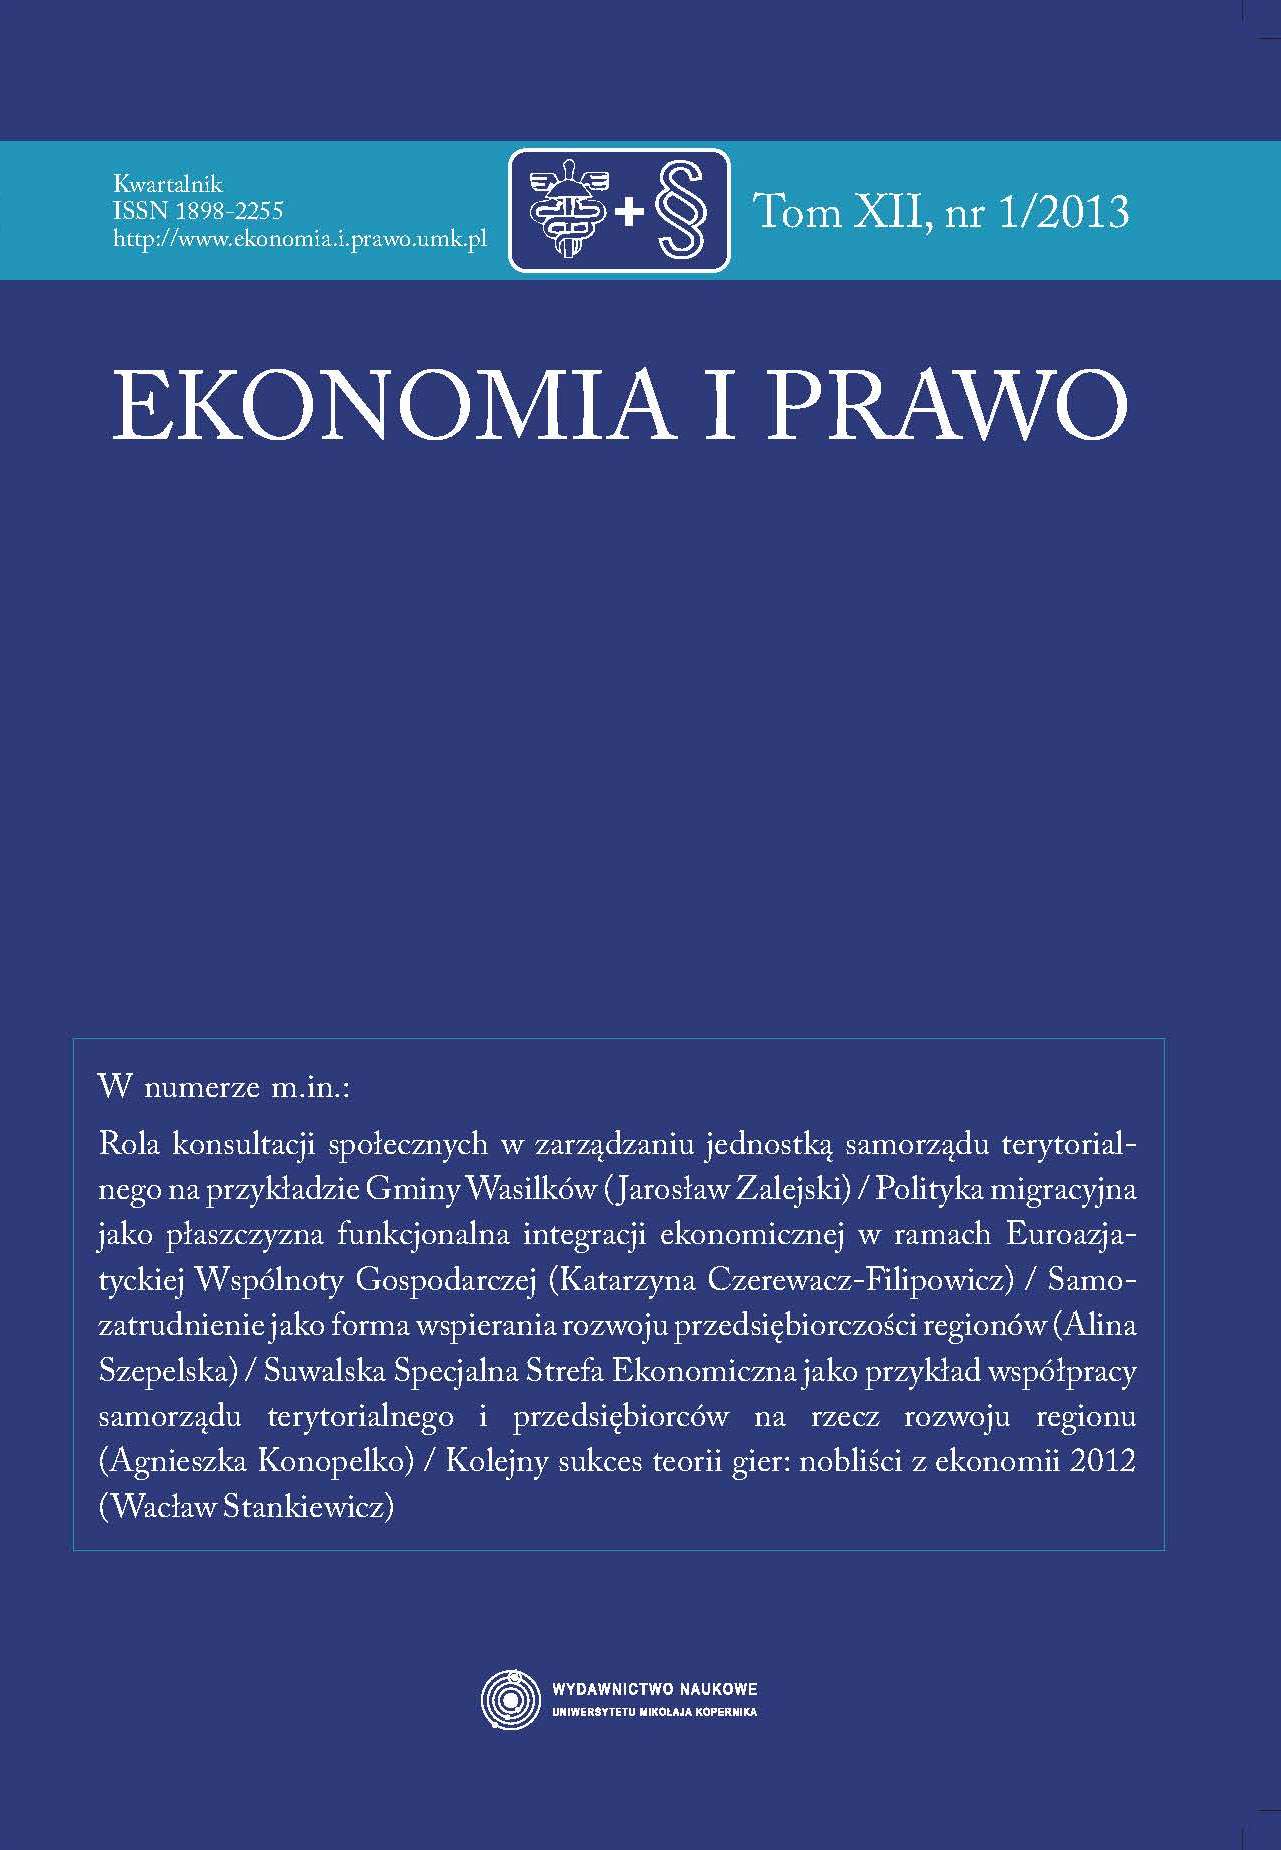 SUWALKI SPECIAL ECONOMIC ZONE AS AN EXAMPLE OF CO-OPERATION OF LOCAL GOVERNMENT AND BUSINESS FOR REGIONAL DEVELOPMENT Cover Image